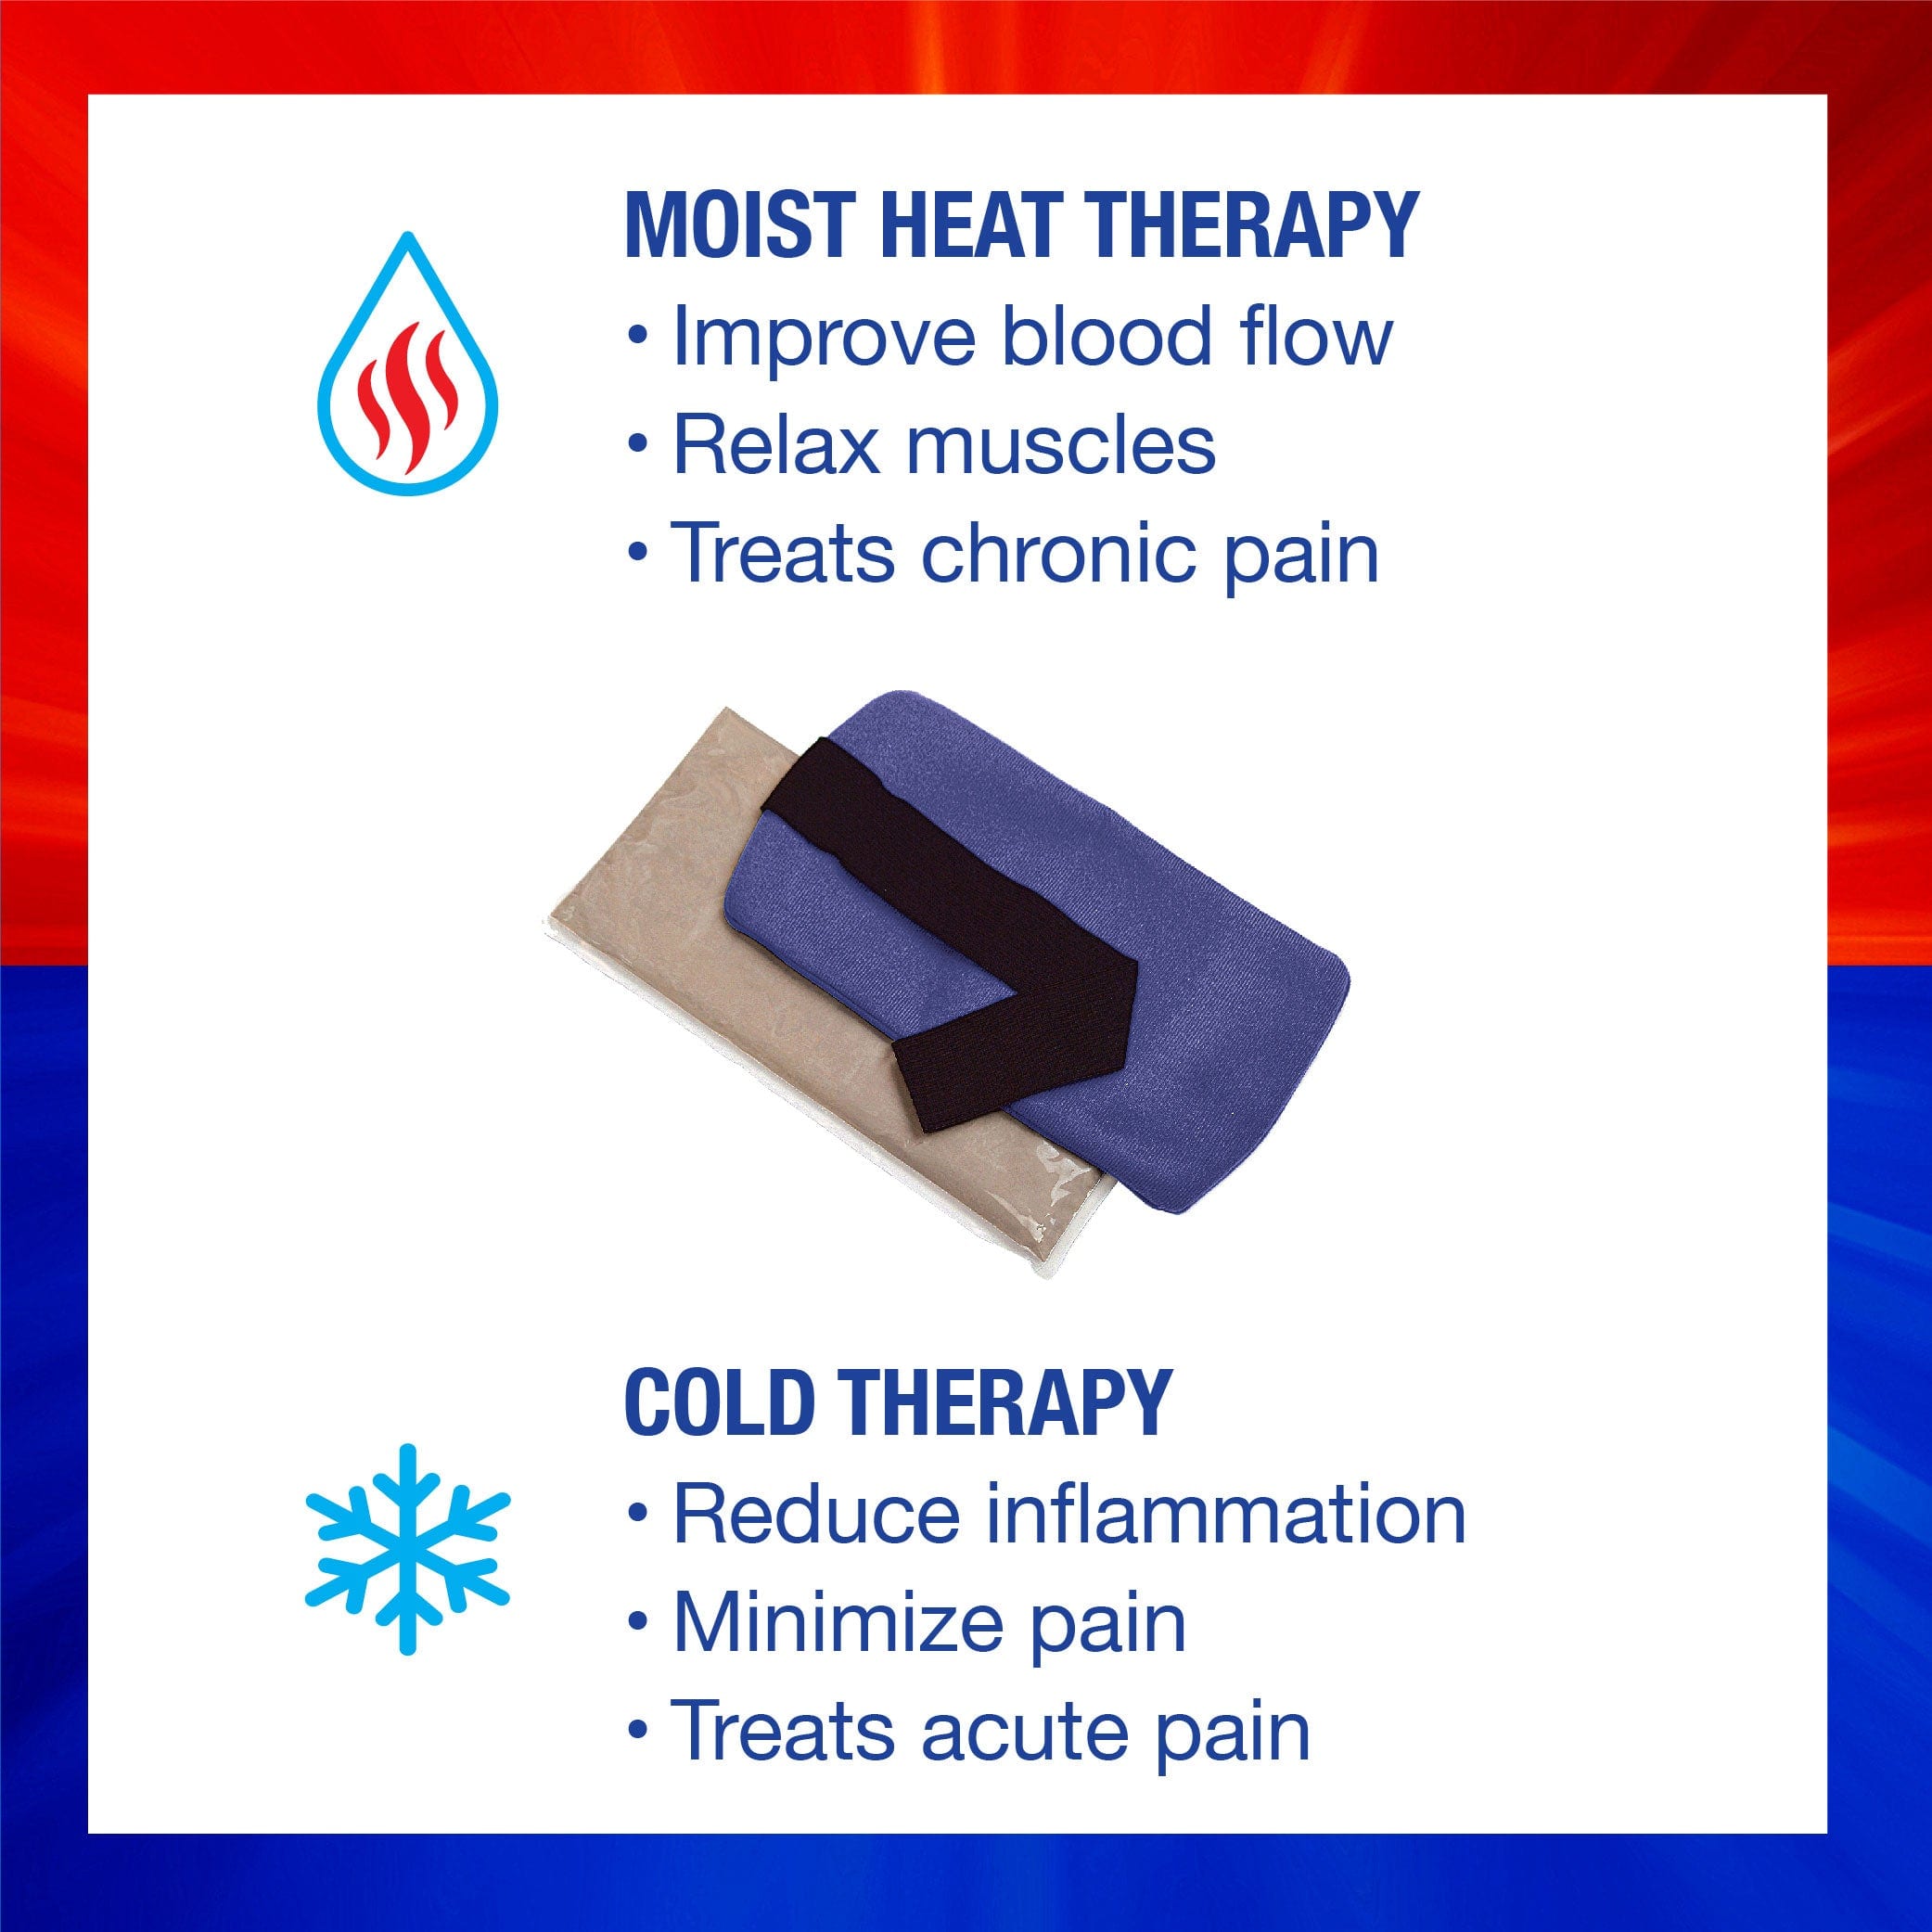 What is heat therapy?